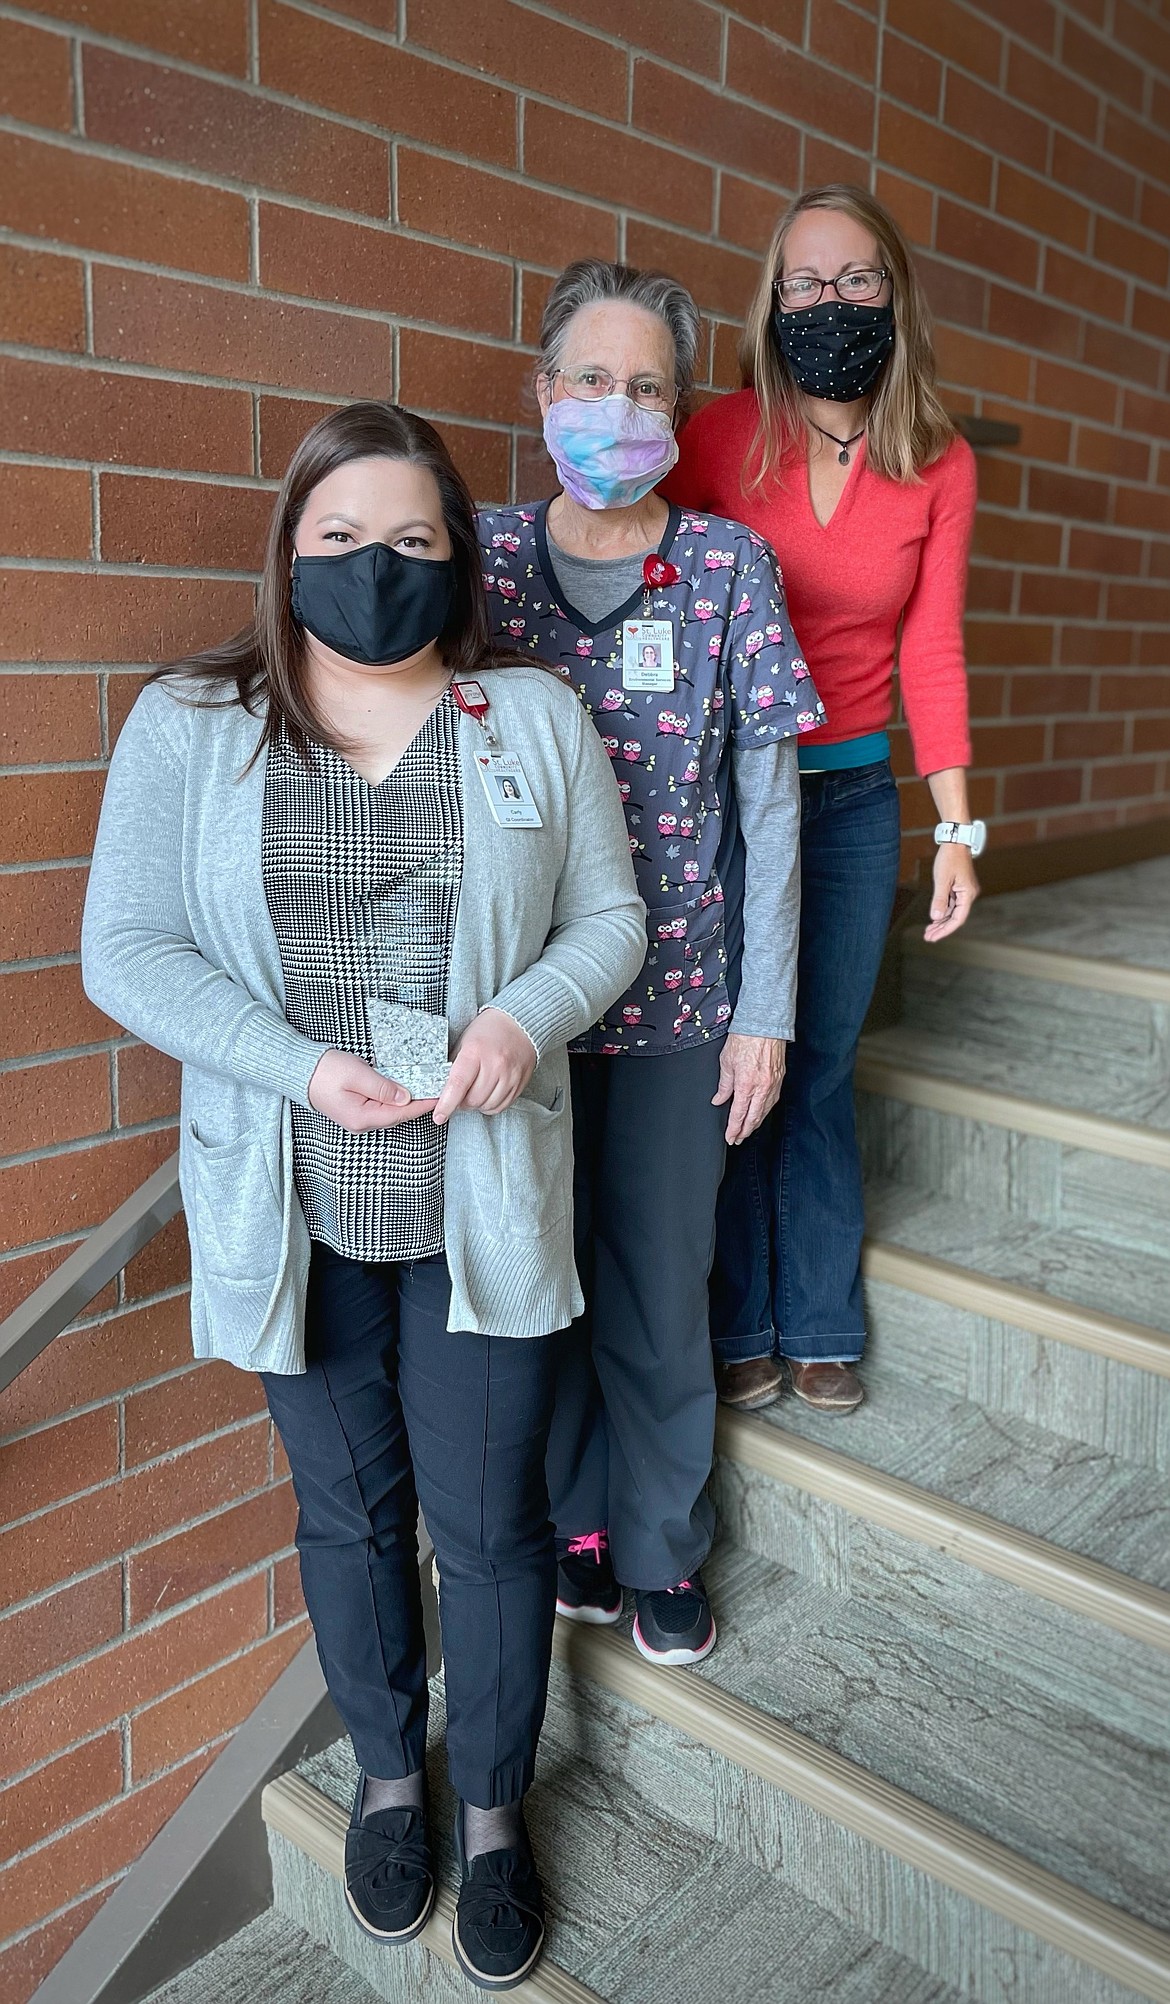 Front to Back: Carly Ryther, Quality Improvement Coordinator; Deb Thompson, EVS Department Manager; and Jill Pennington, Case Manager at St. Luke Community Healthcare. (Courtesy of Whitney Liegakos)